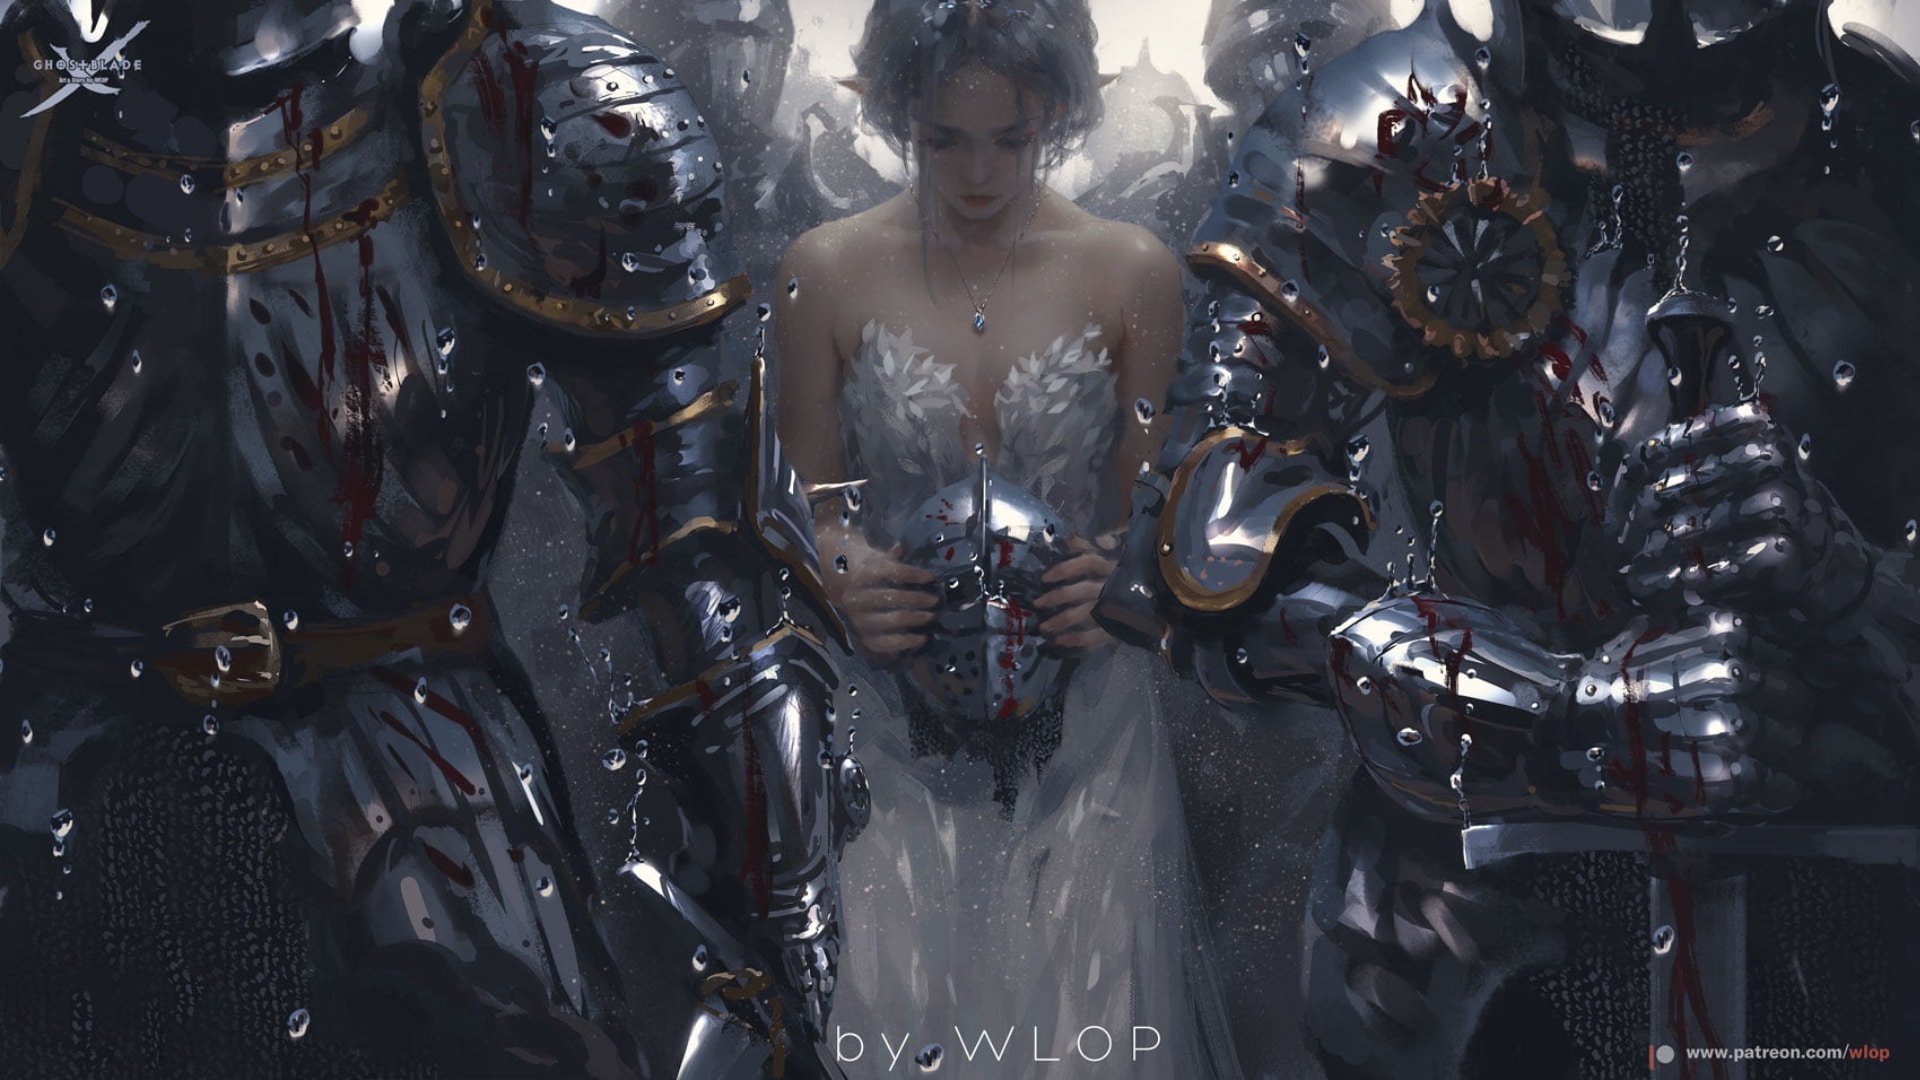 A woman in a gorgeous dress surrounded by gladiators - GhostBlade